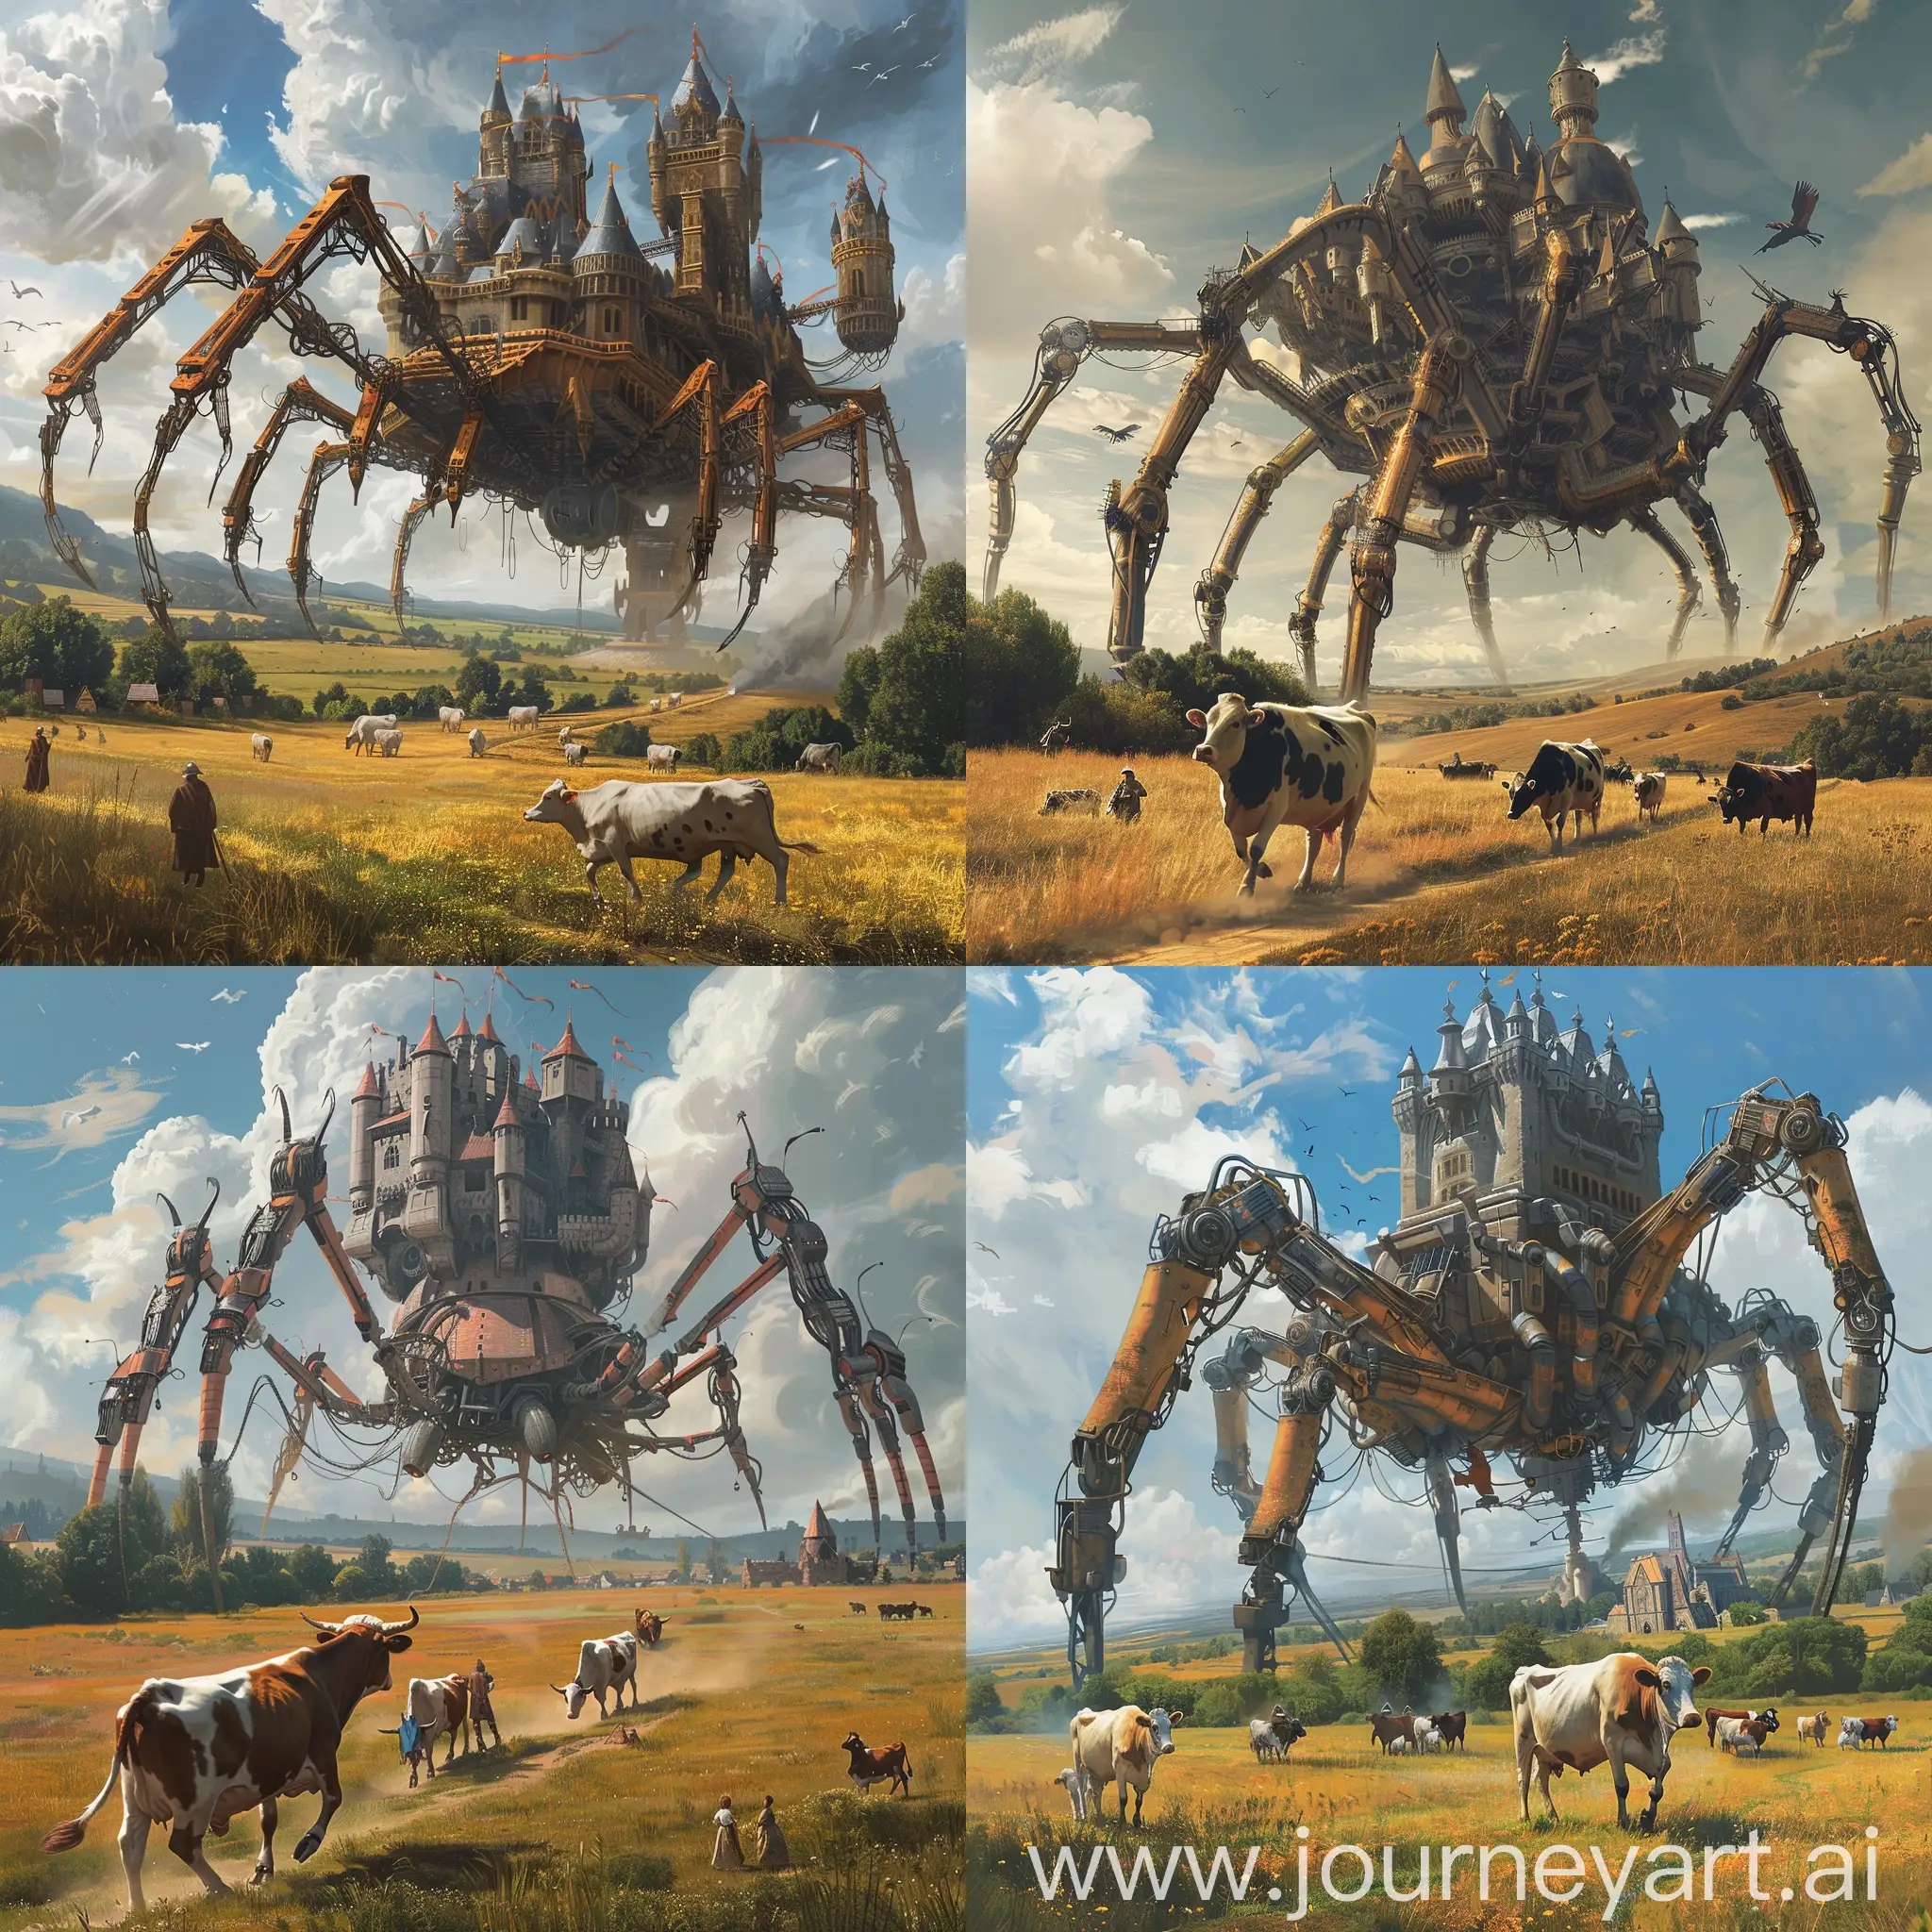 Medieval-Castle-DND-Style-with-SpiderLike-Arms-Moving-through-Fields